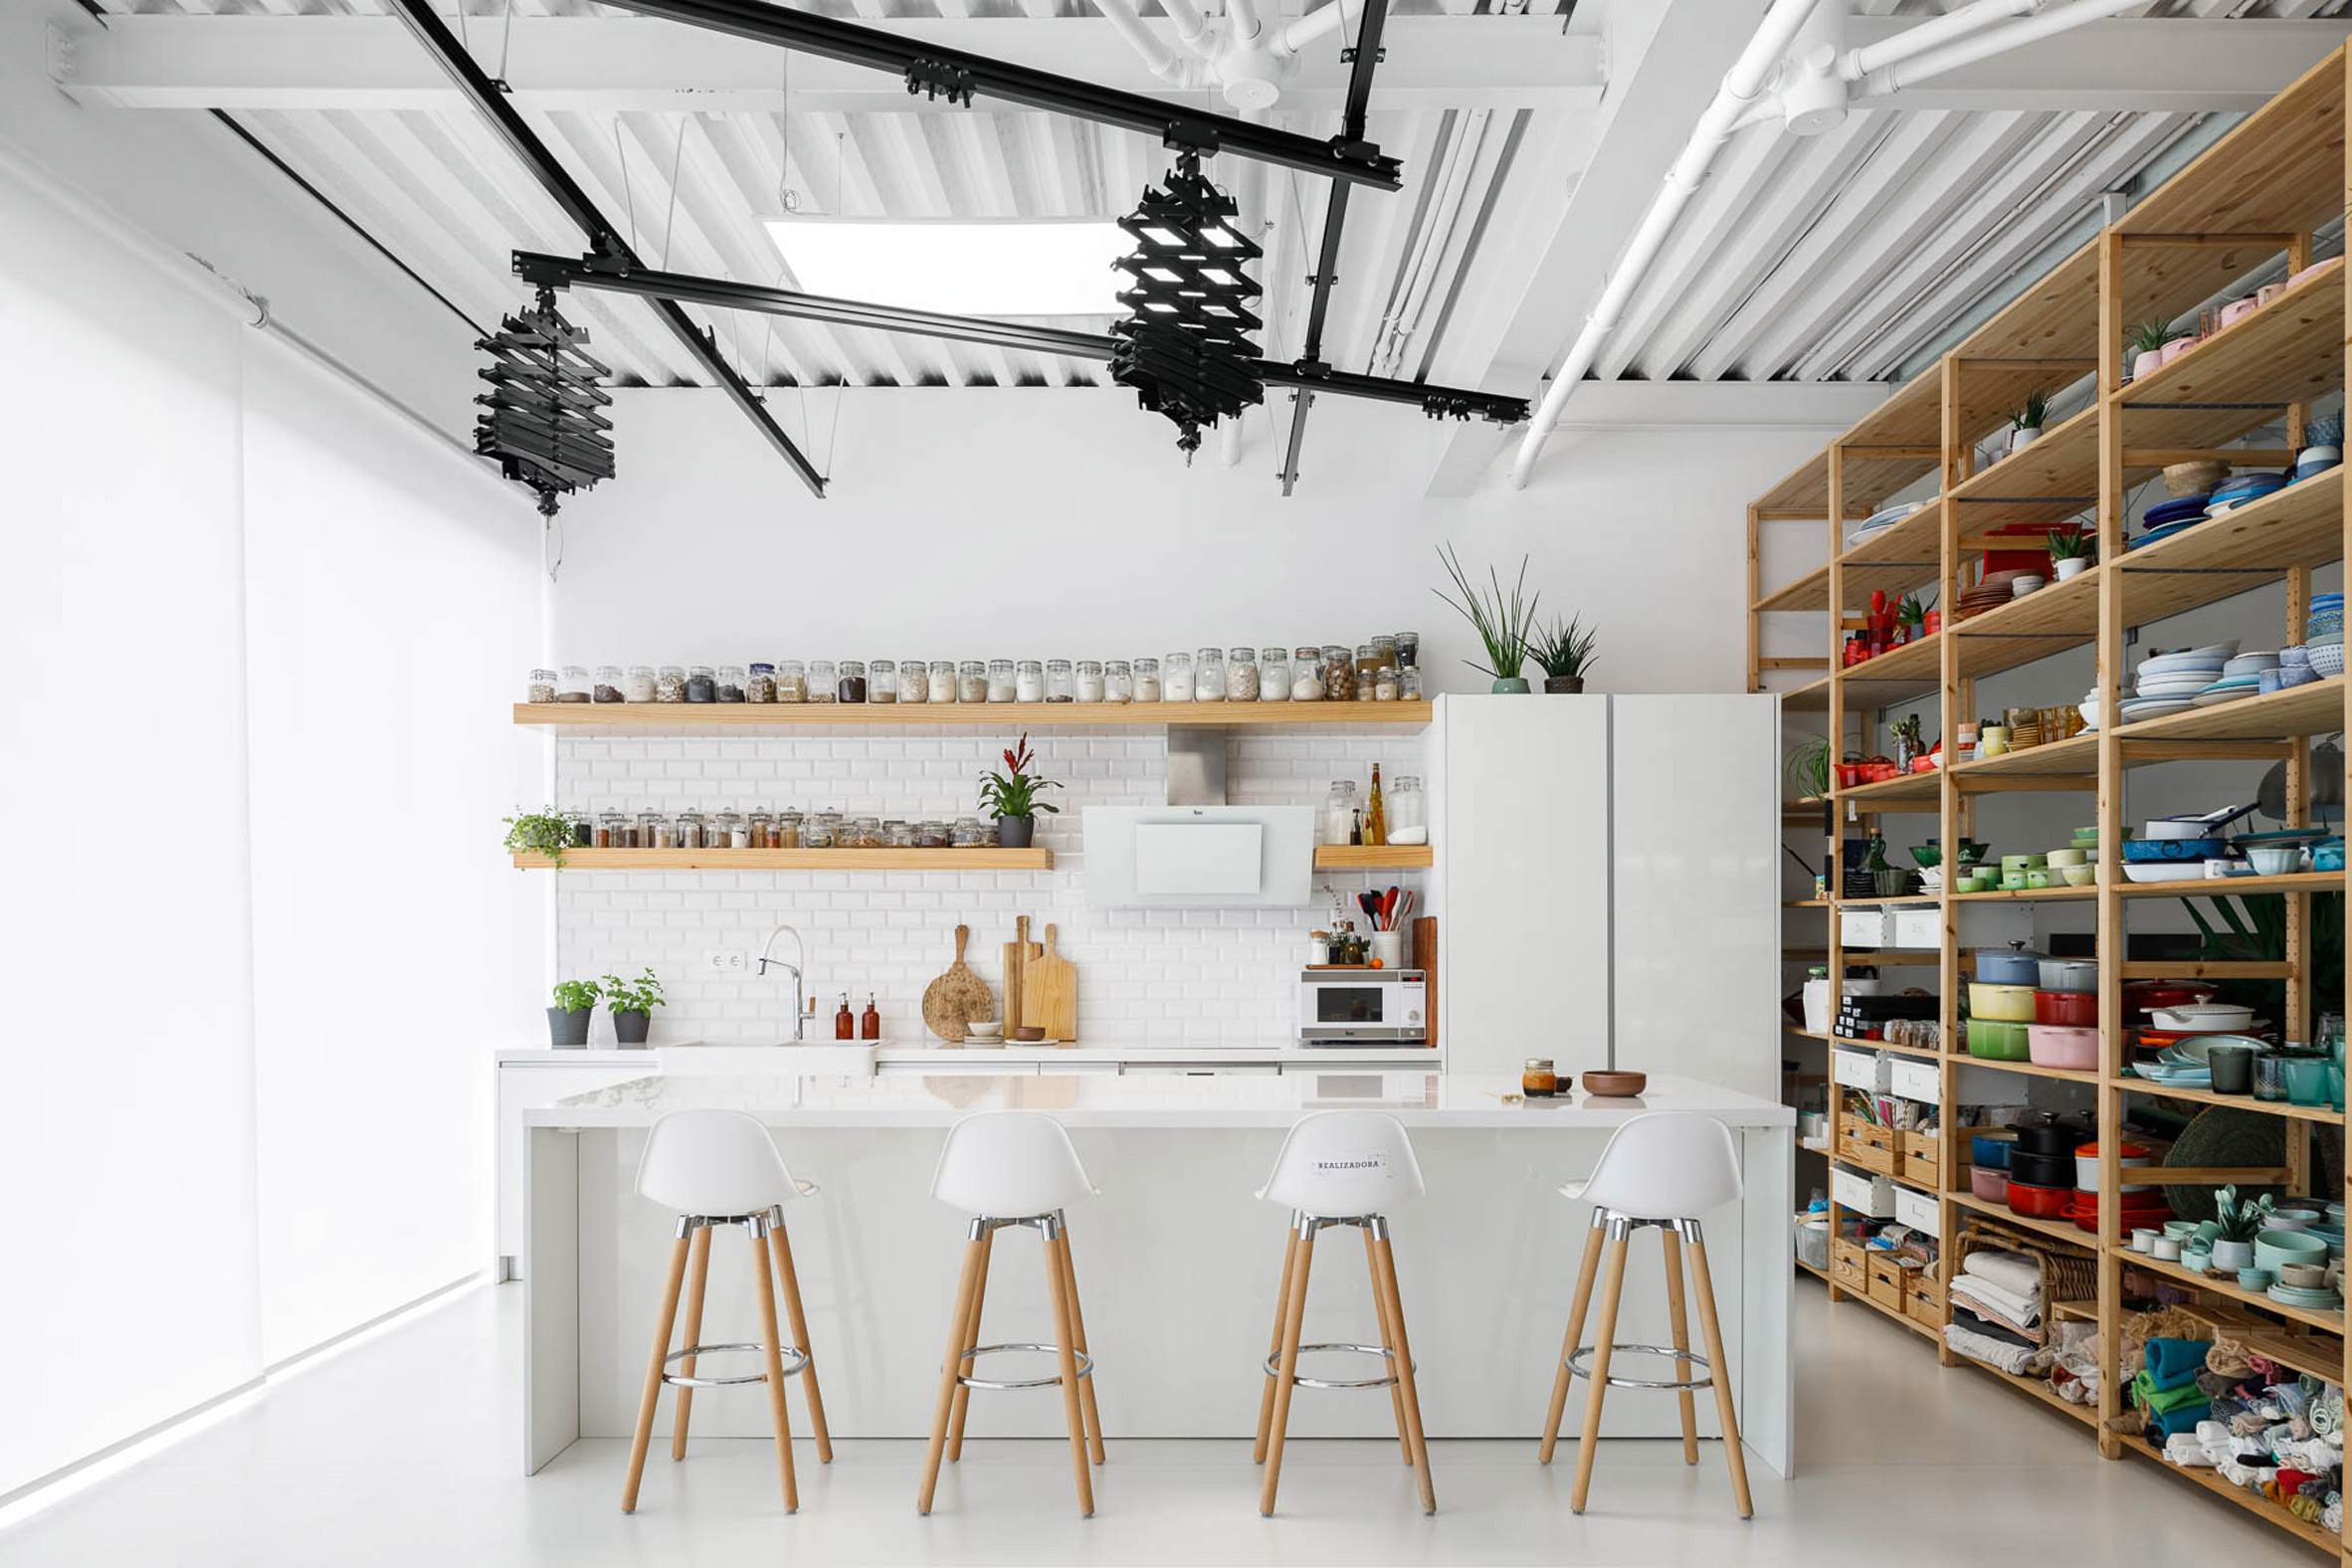 Photography studio in E-goi and Clavel's Kitchen by Paulo Merlini Architects